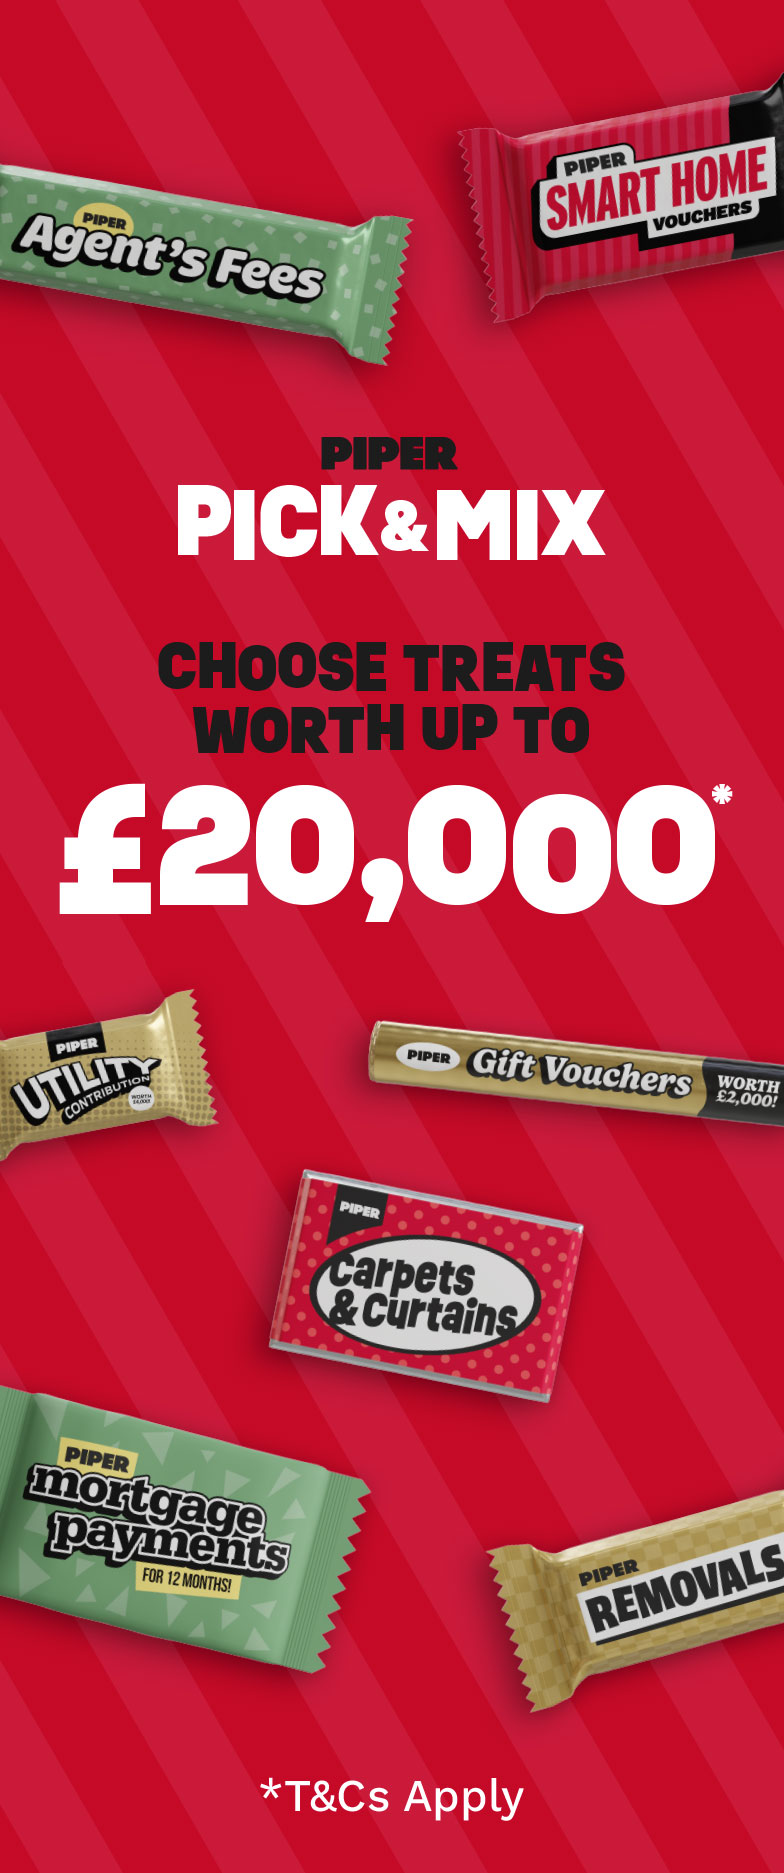 Piper Pick & Mix, Choose Treats Worth up to £25,000